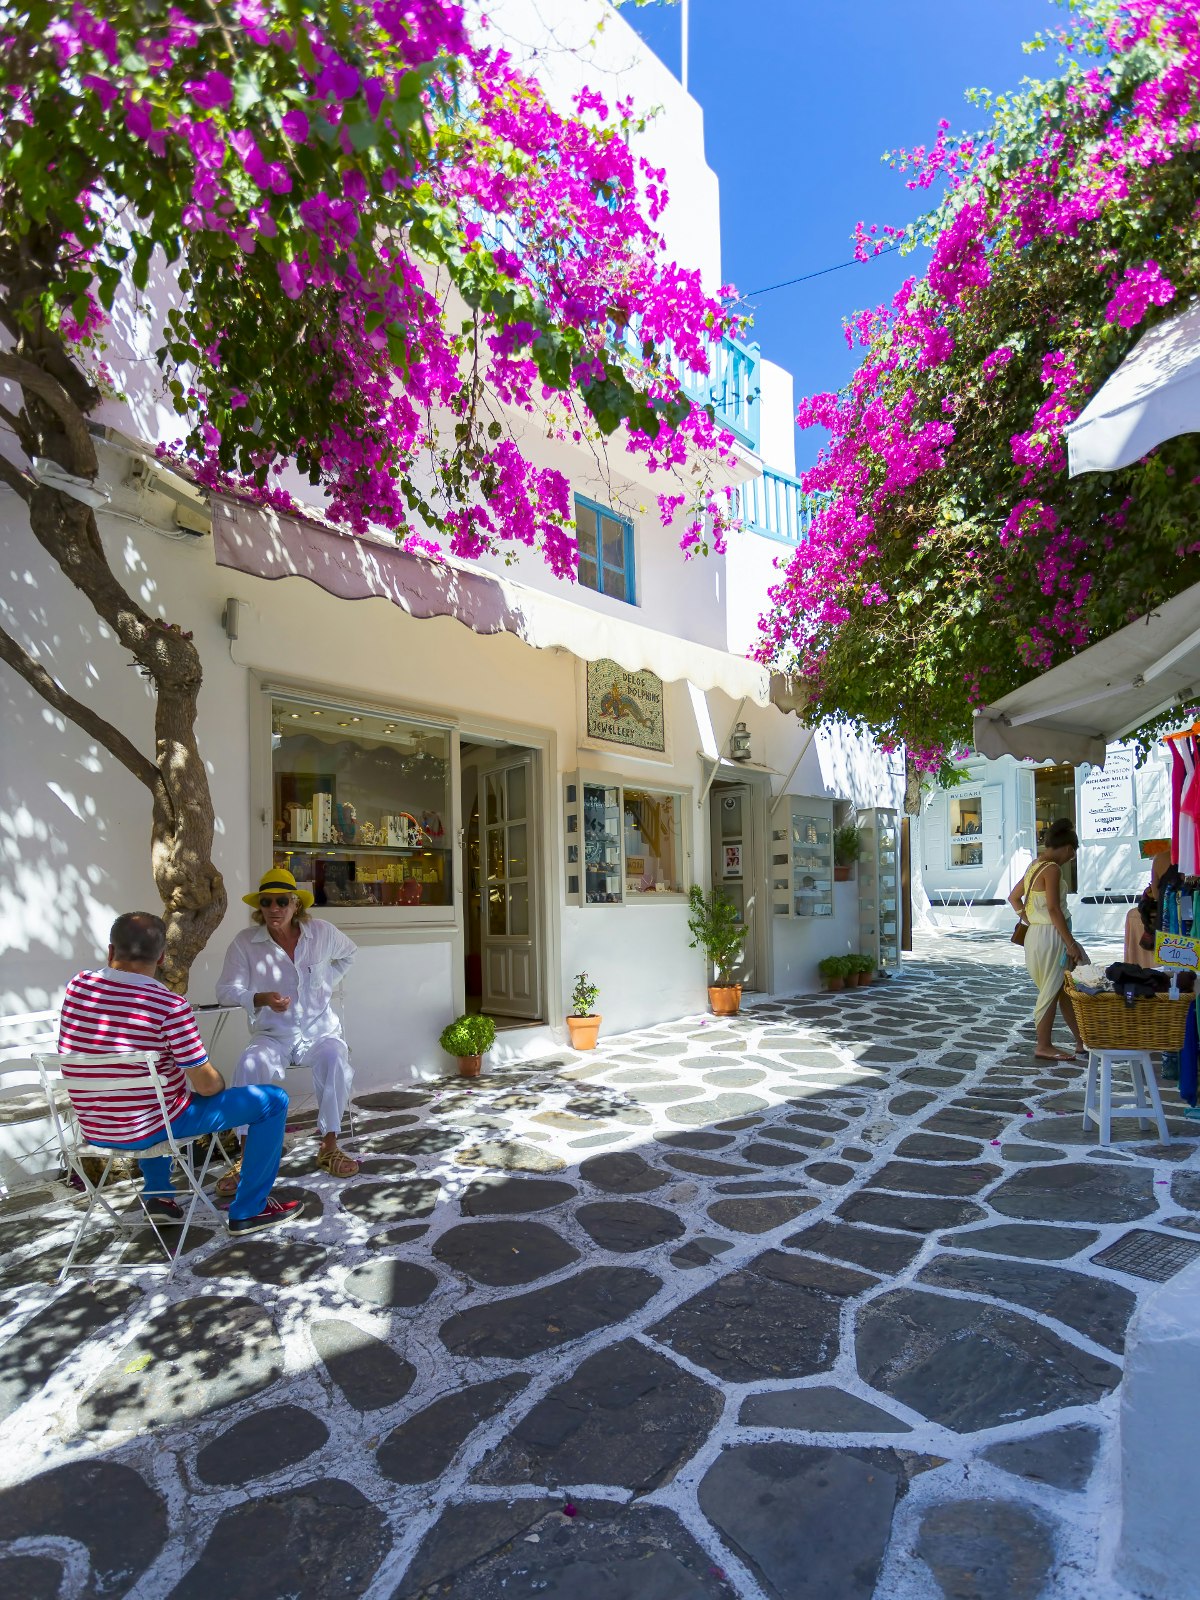 Small street lined with purple bougainvillea, shop fronts and small cafes. There are seats outside some of the cafes with people sitting and talking in Hora, Mykonos, Greece